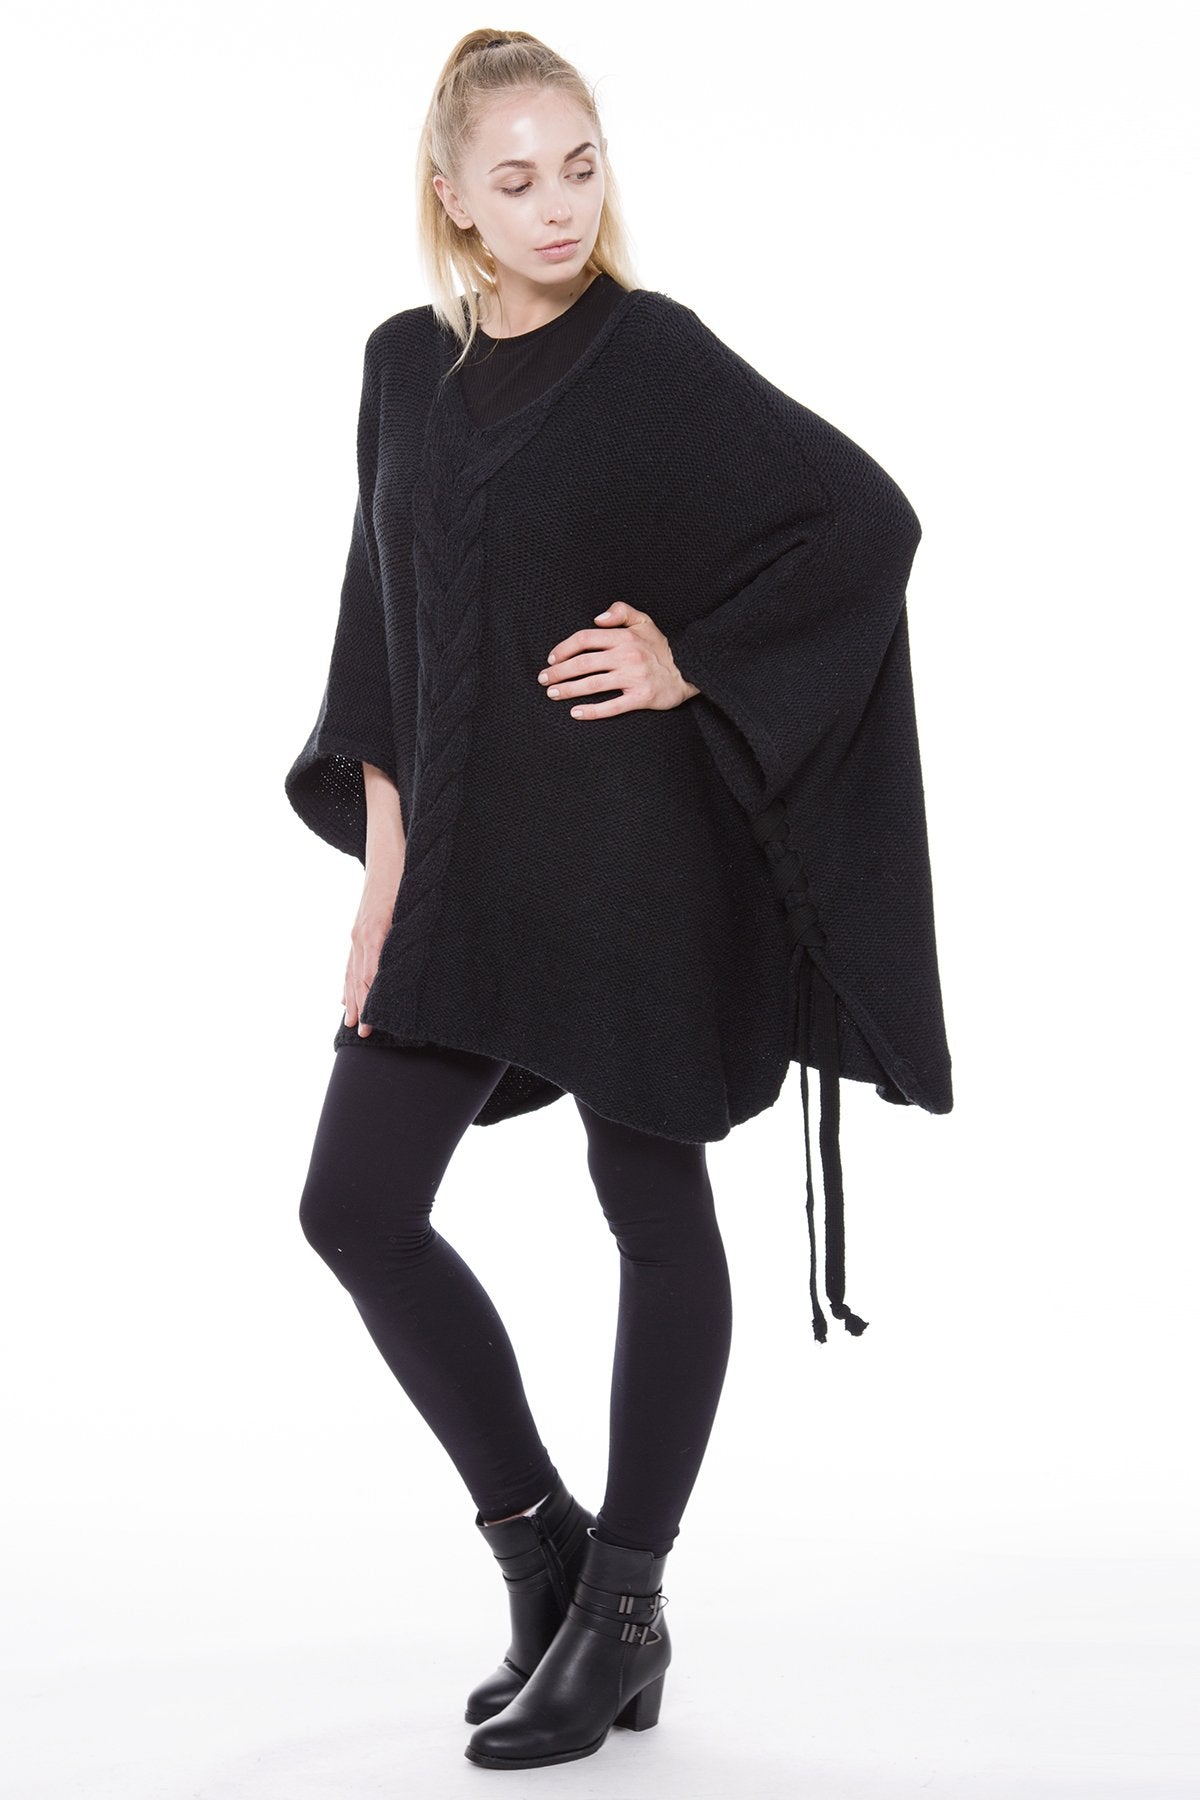 Solid Color Knitted Poncho W/ Criss-Cross Strings On Sides